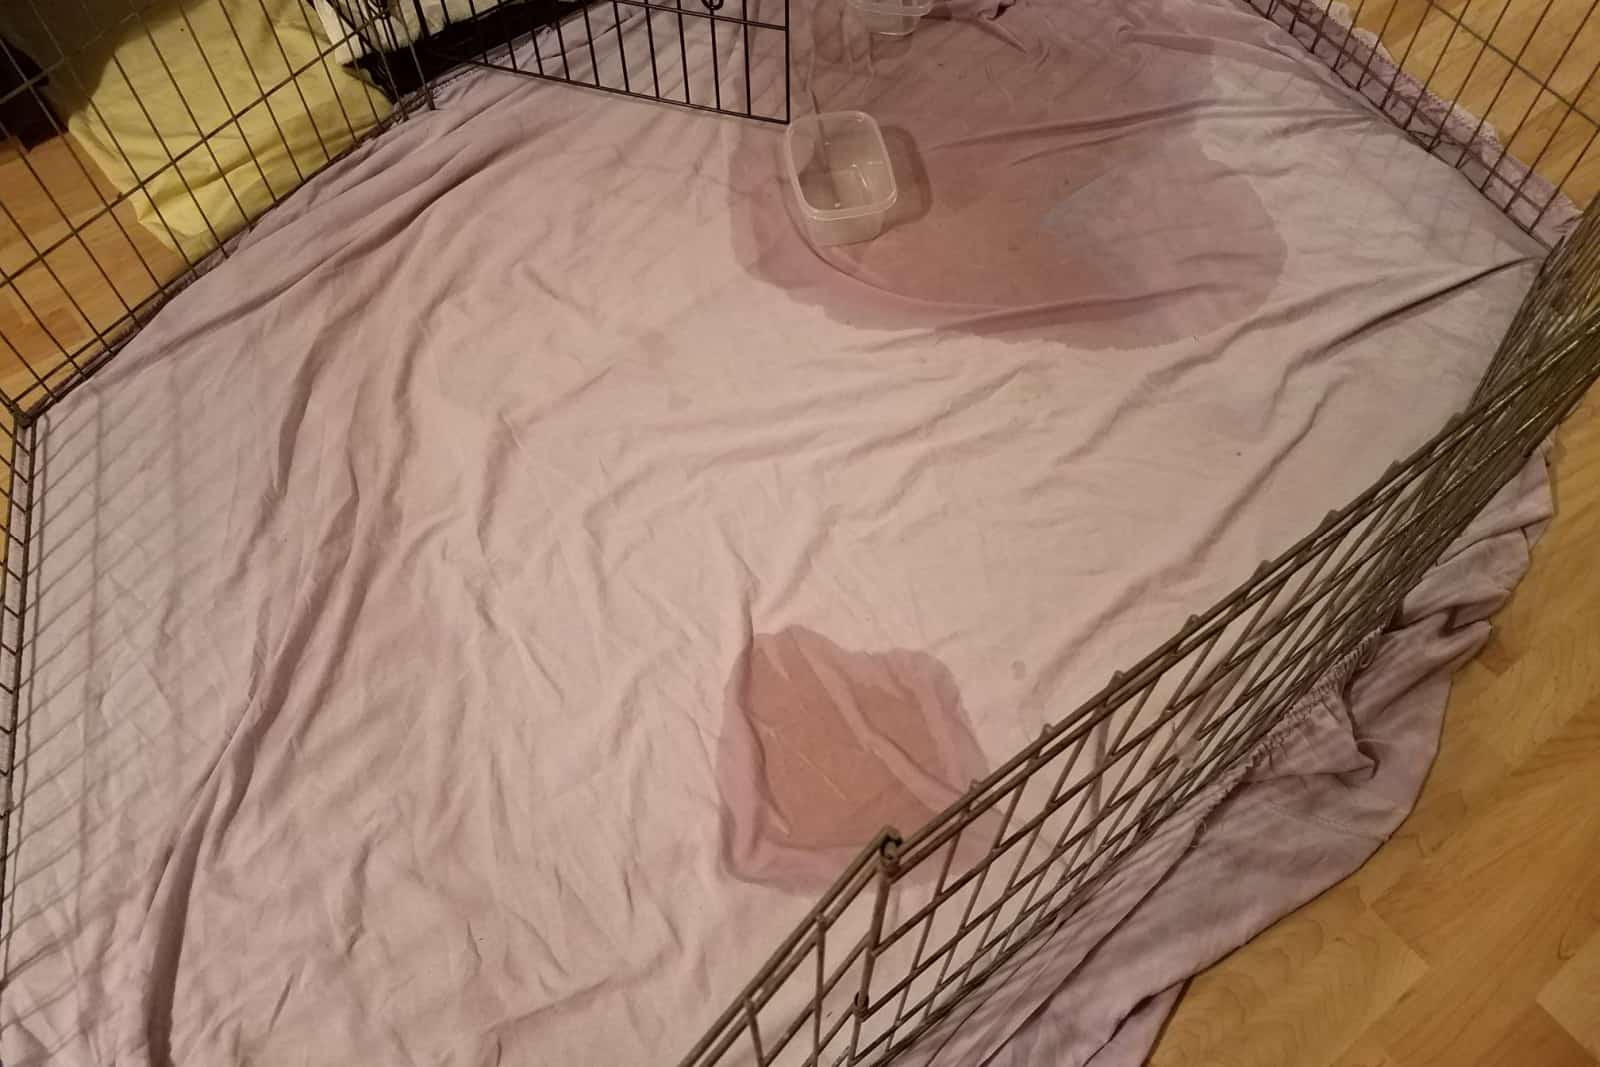 dog in crate and pee or urine puddle